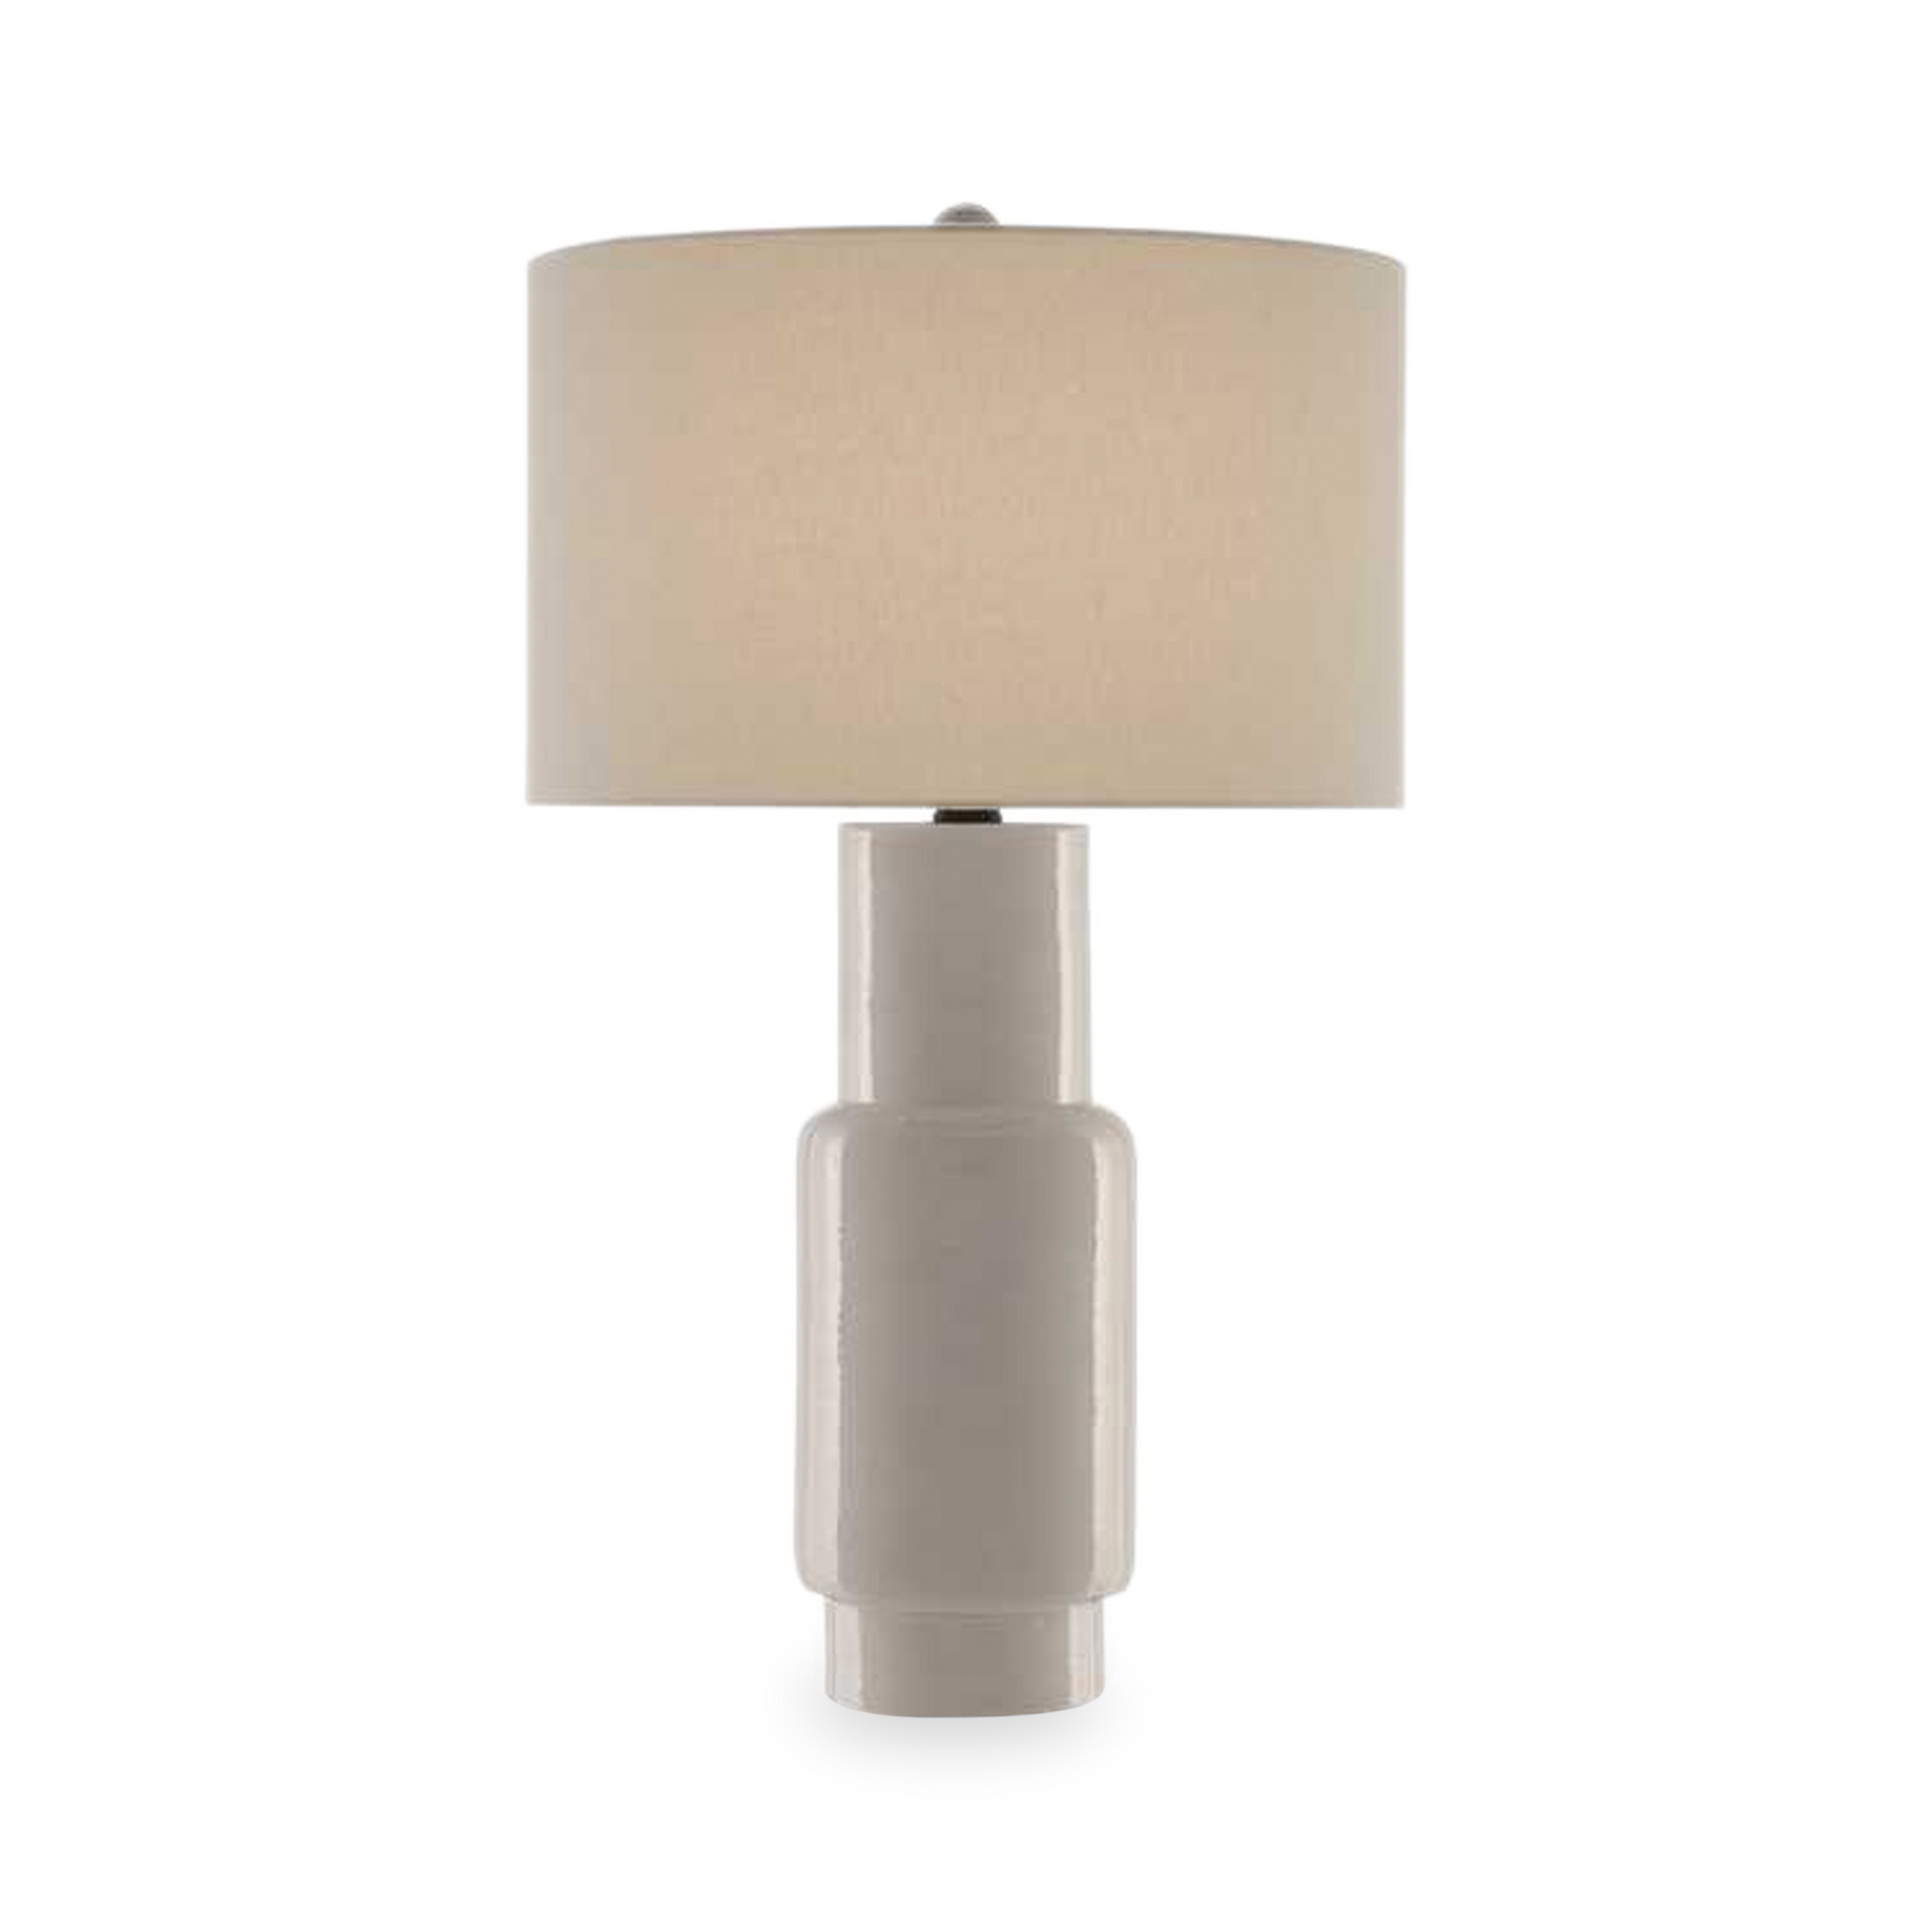 The white Janeen table lamp is a throwback to the 1960s when design was groovy and our cultural mores were tripping the light fantastic! The terracotta lamp, which stands 31 inches